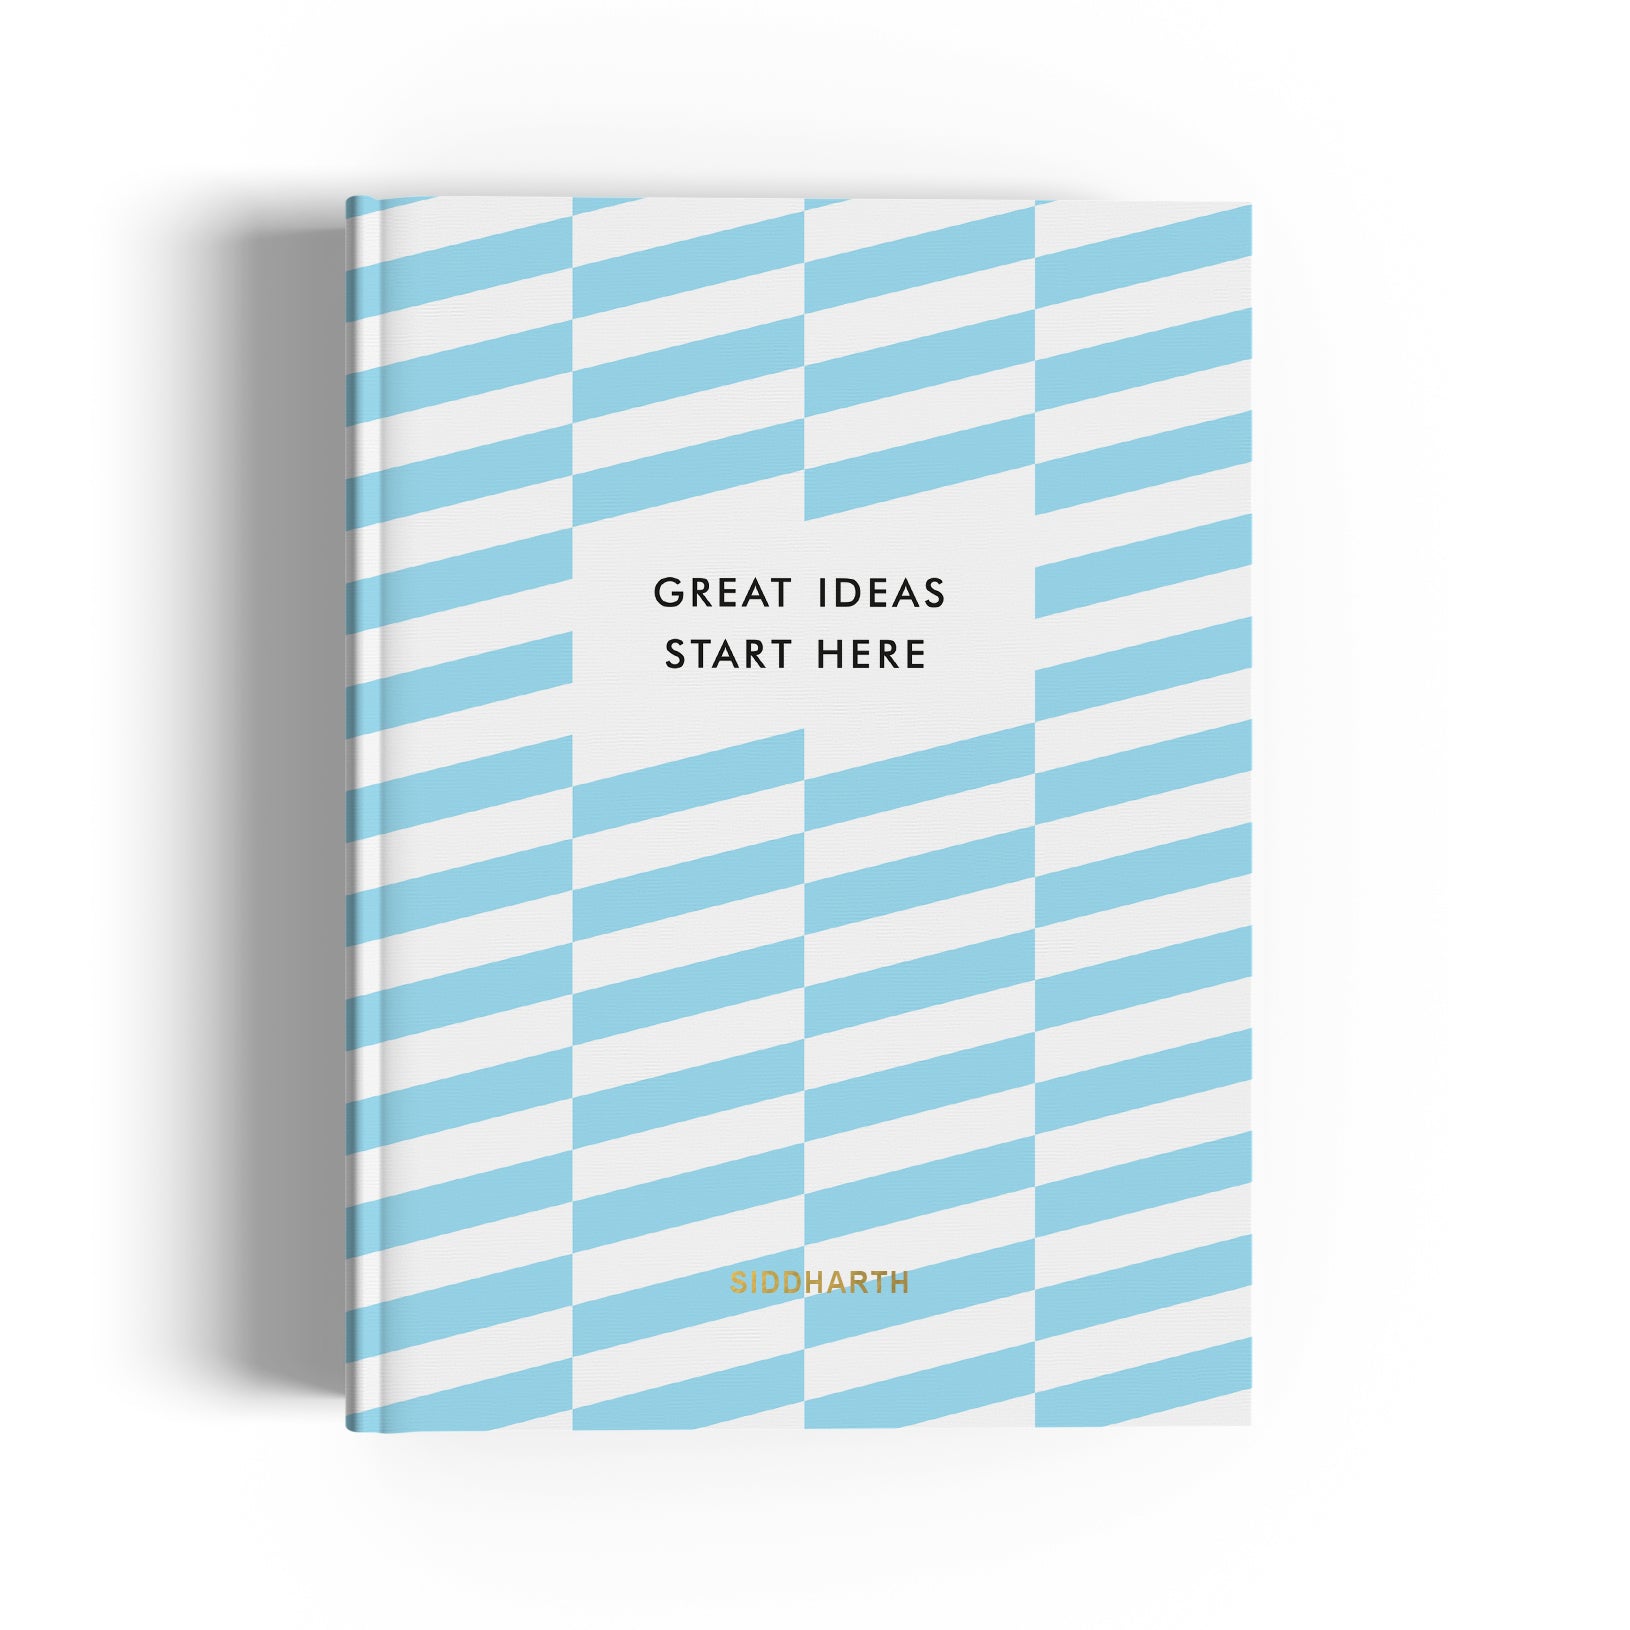 7mm A5 sized notebooks are available in ruled &amp; dot grid which can be personalized.